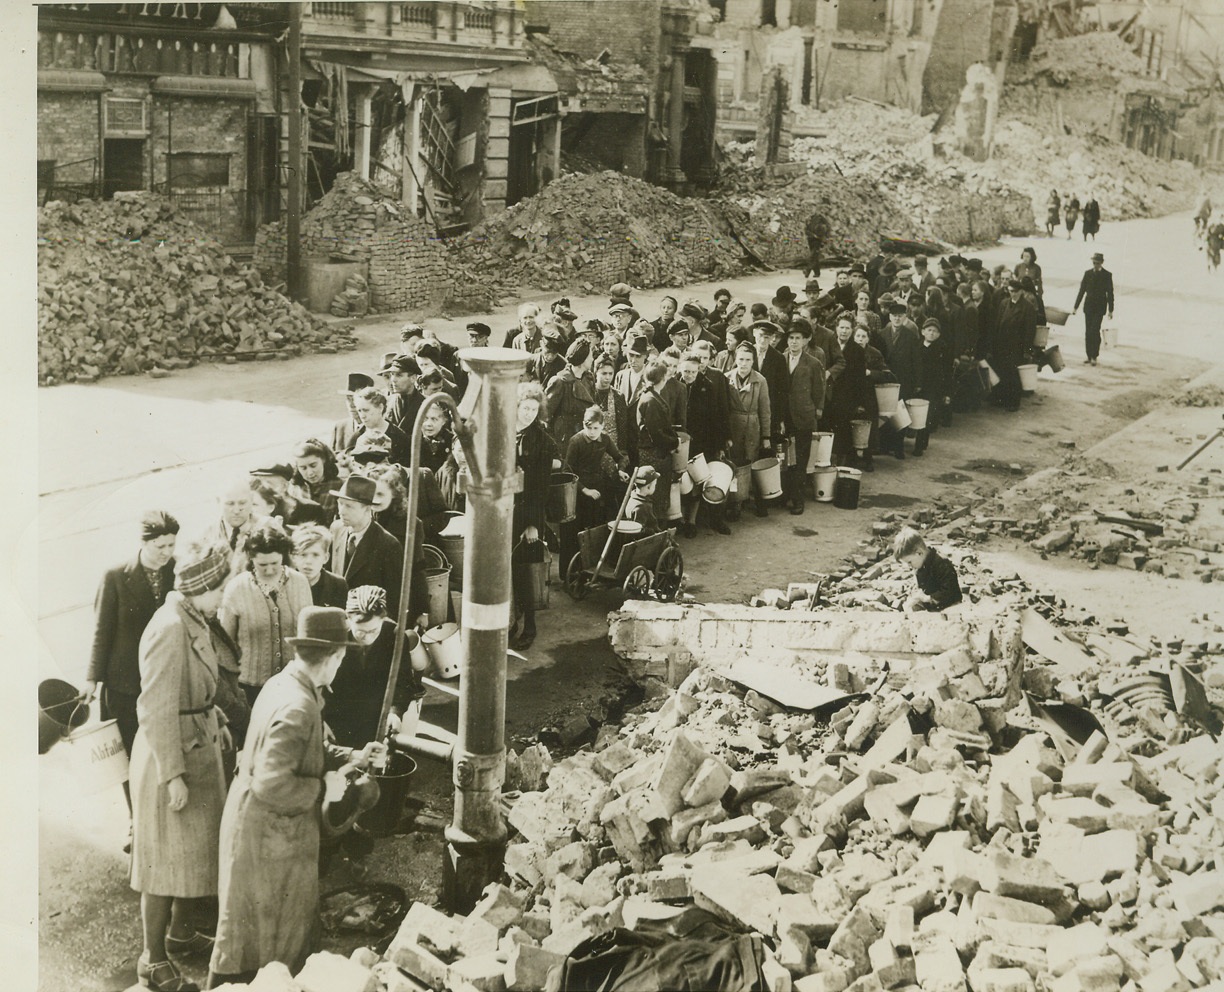 Rush Growler for Water, 4/29/1945. Germany—German civilians line up for supply water from one of few sources in Magdeburg after capture by Allies. Water from the pump is handed out in small rations. Credit –WP- (ACME);